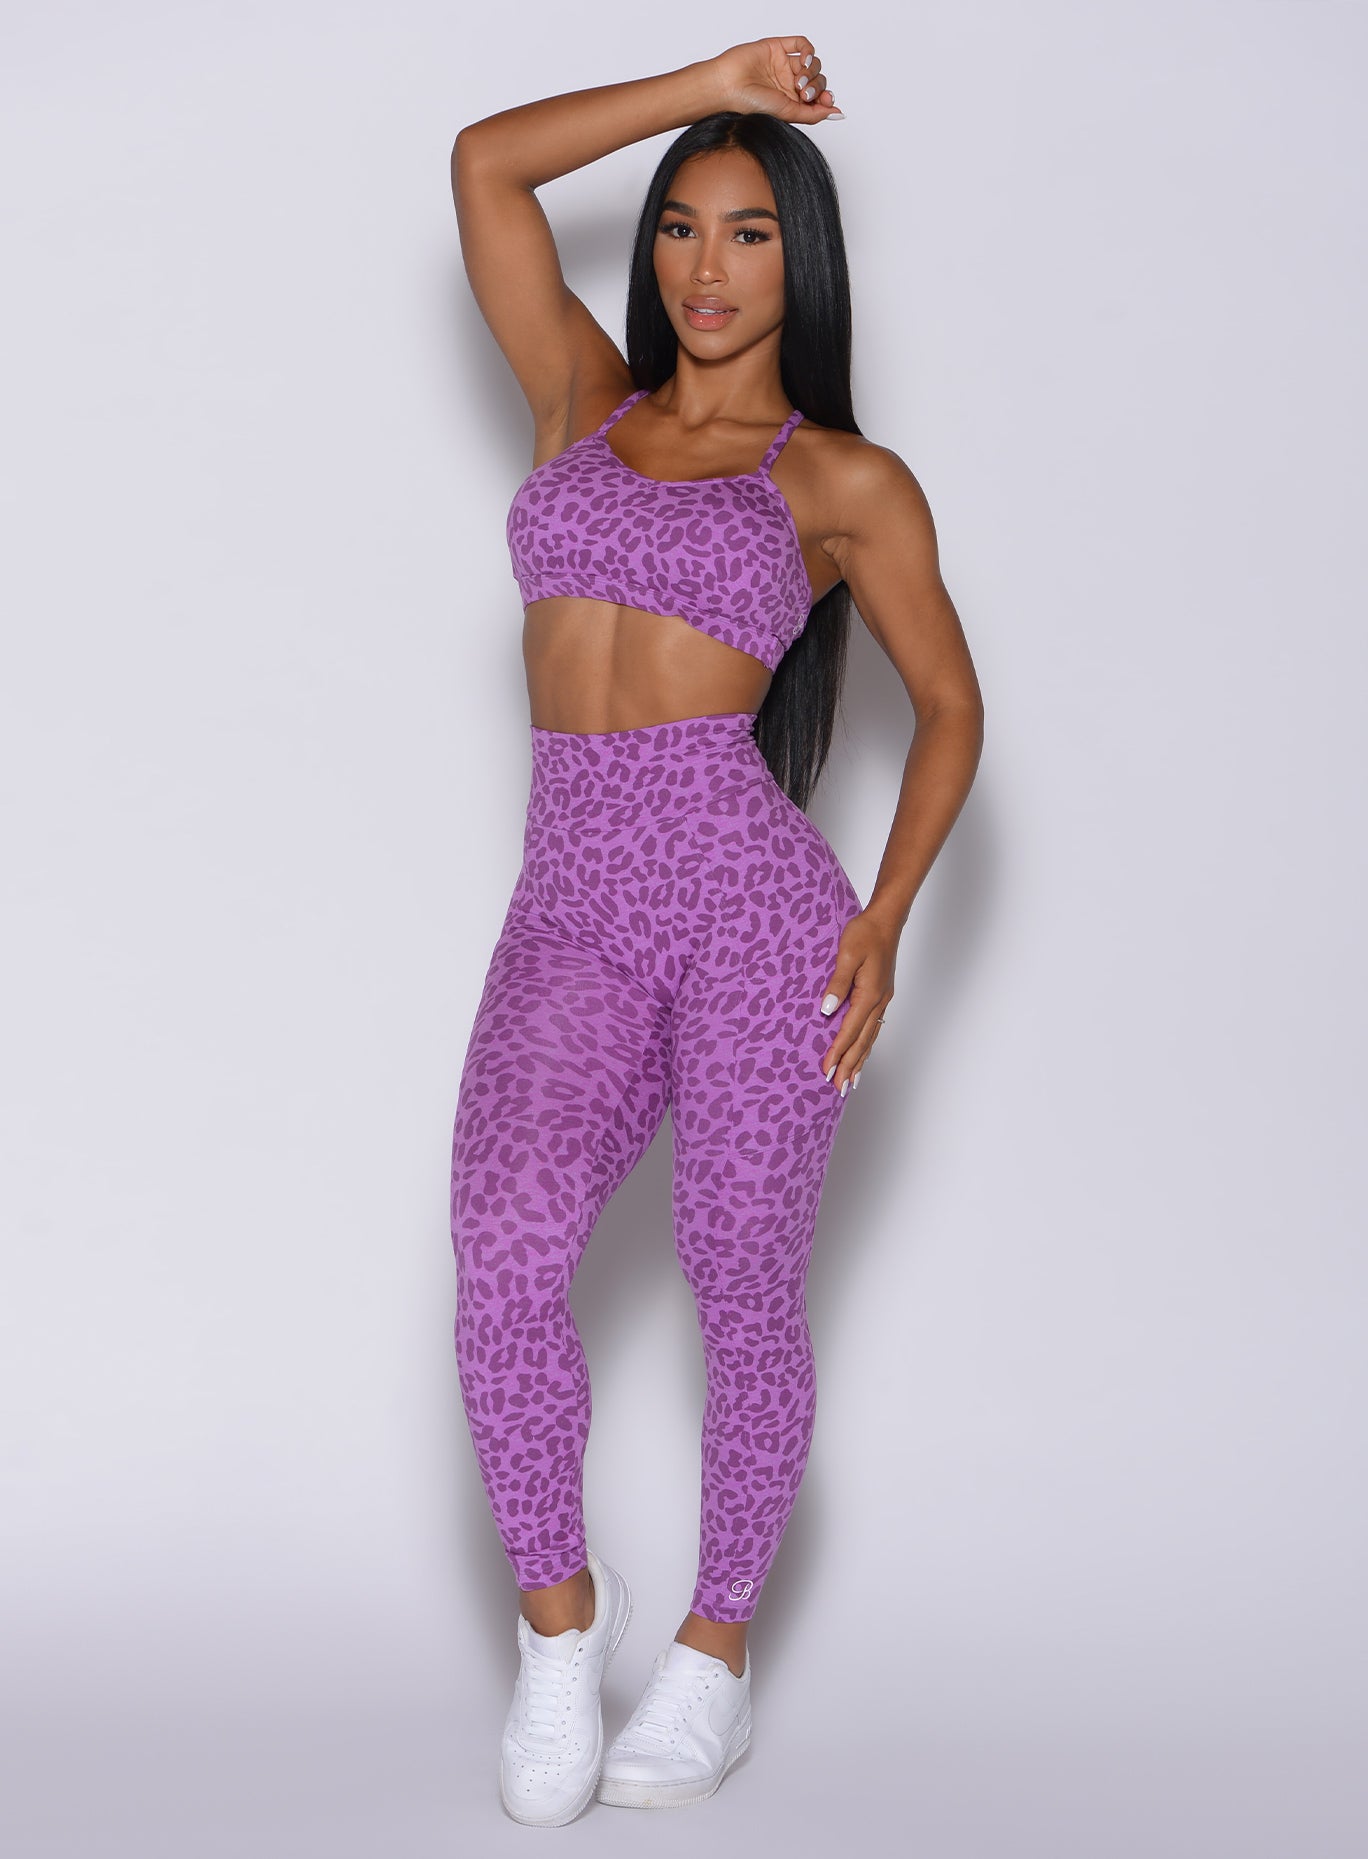 Front profile view of a model facing forward wearing our curves leggings in purple cheetah color and a matching sports bra